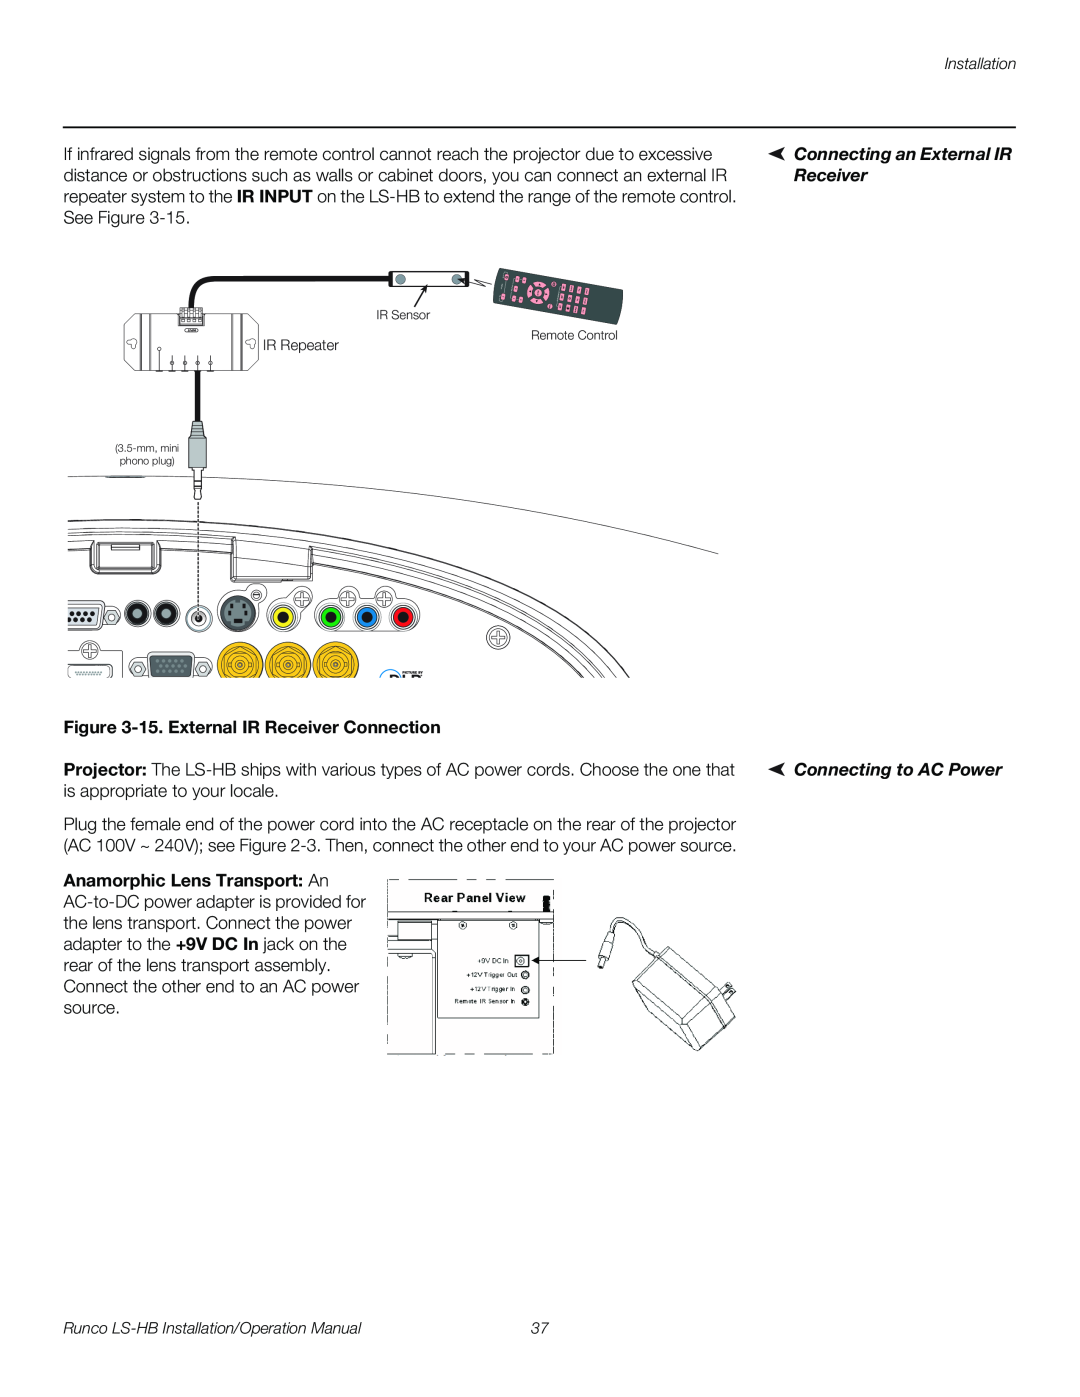 Runco LS-HB operation manual Connecting an External IR, 15. External IR Receiver Connection, Connecting to AC Power 